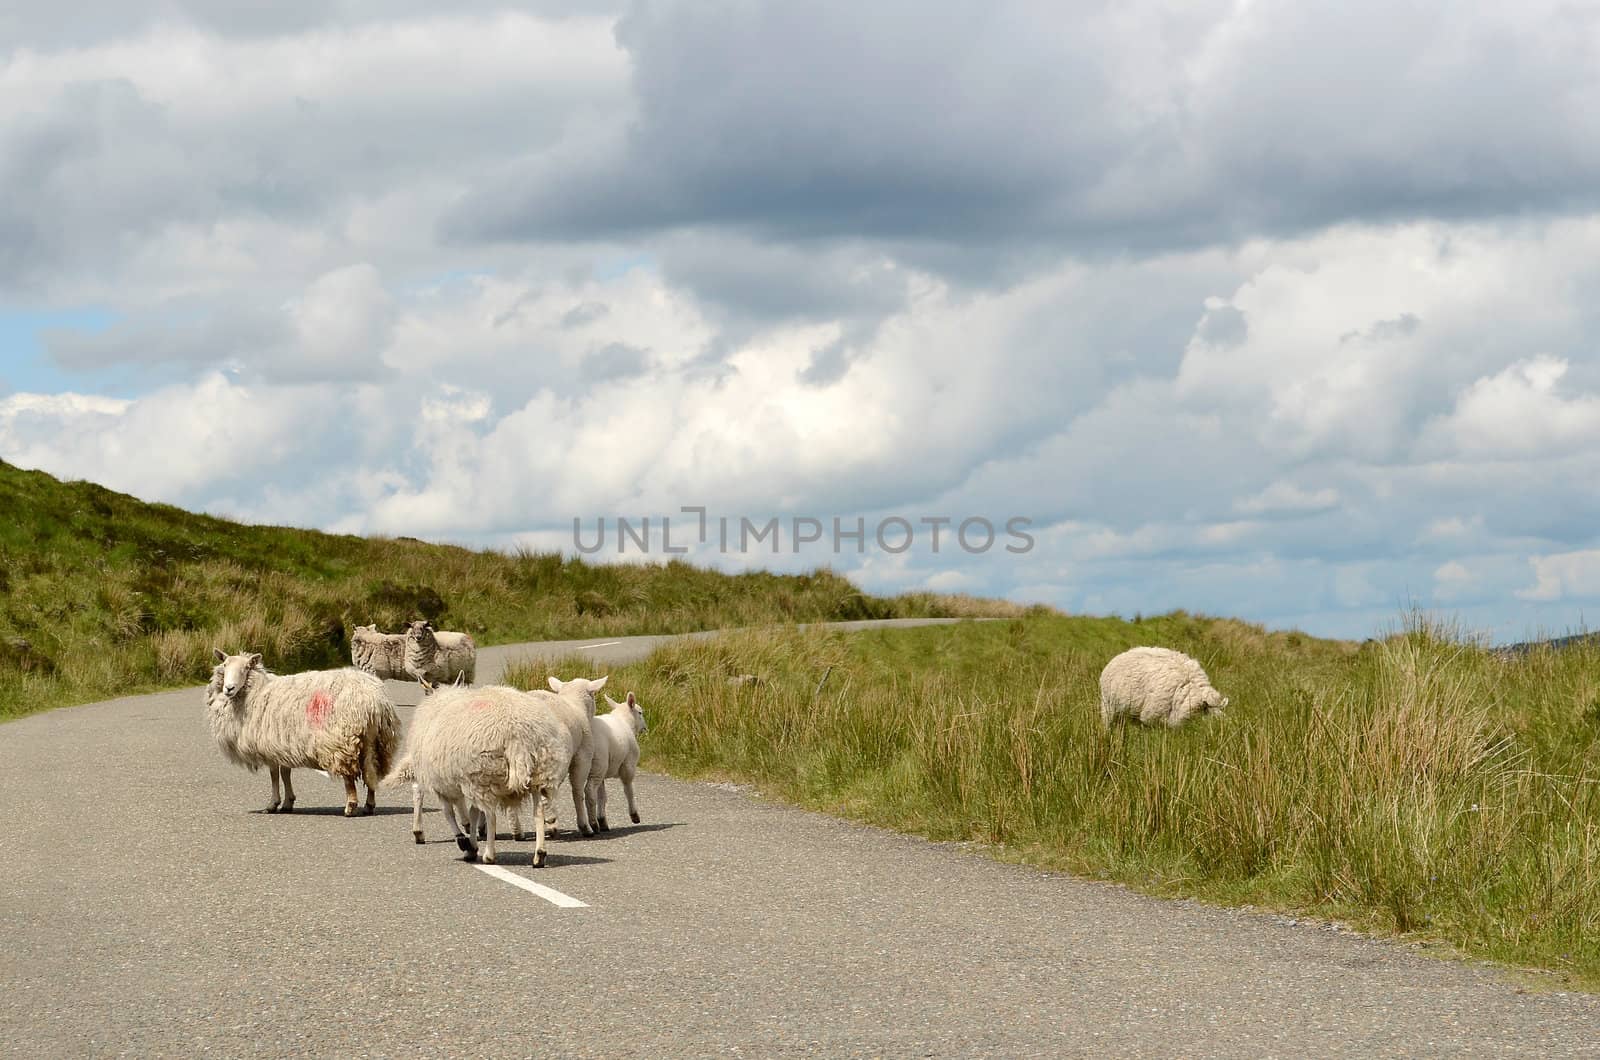 Sheep on the road in Ireland by pljvv